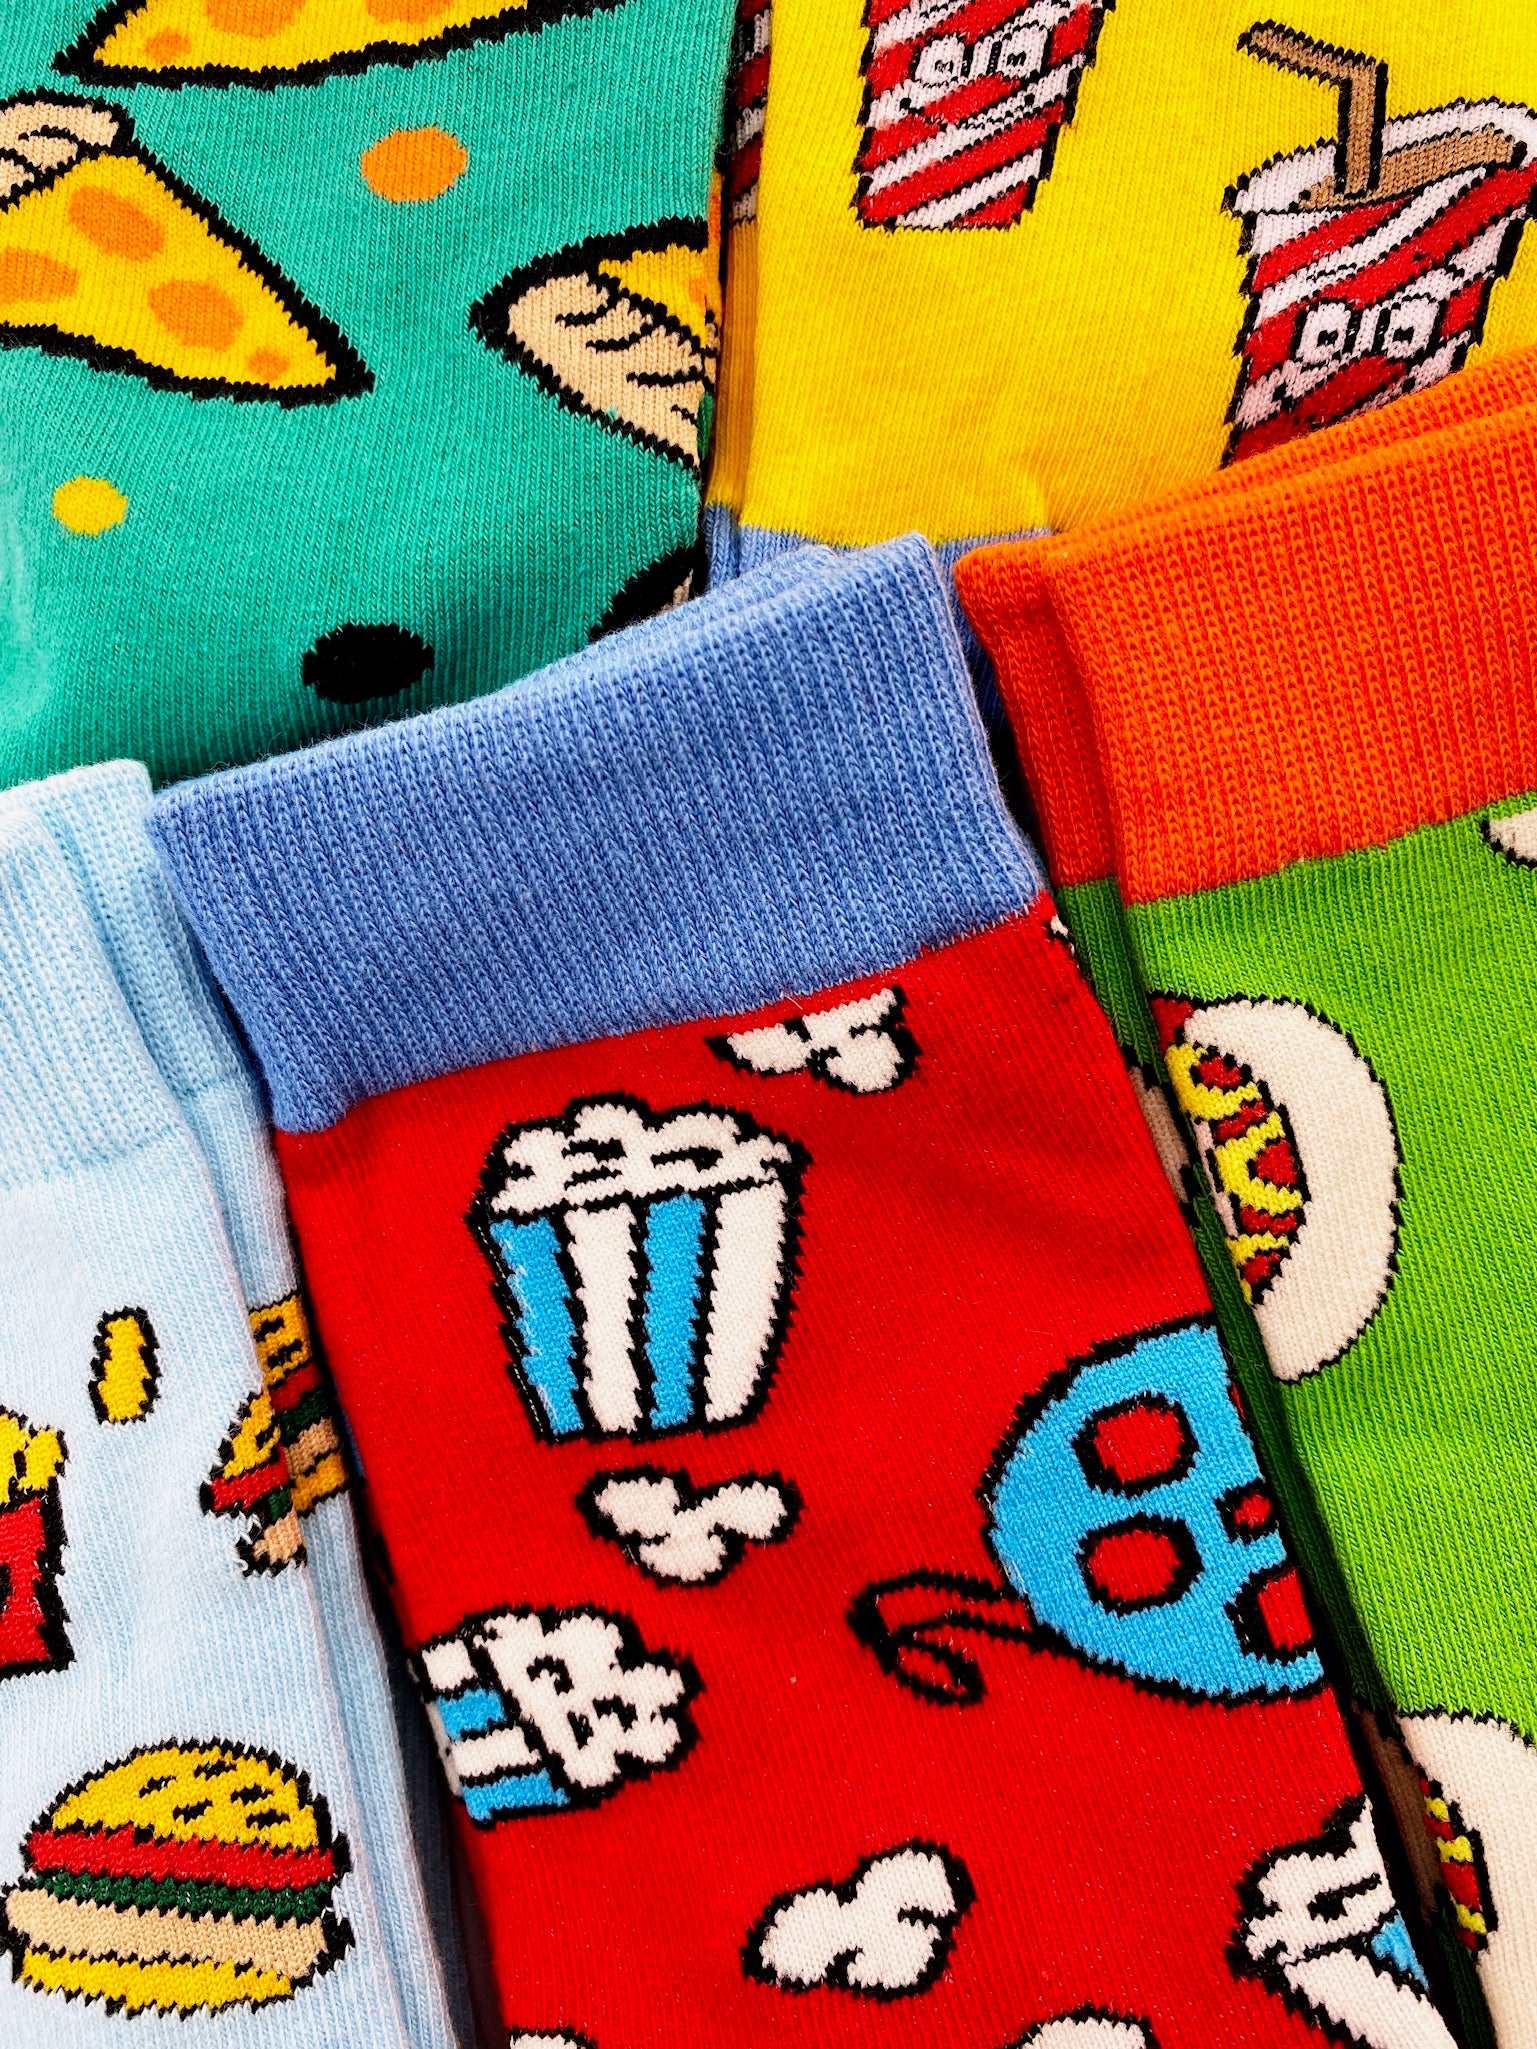 5 colourful pairs of food socks featuring burgers & fries, pizza slices, popcorn, hot dogs and fizzy pop